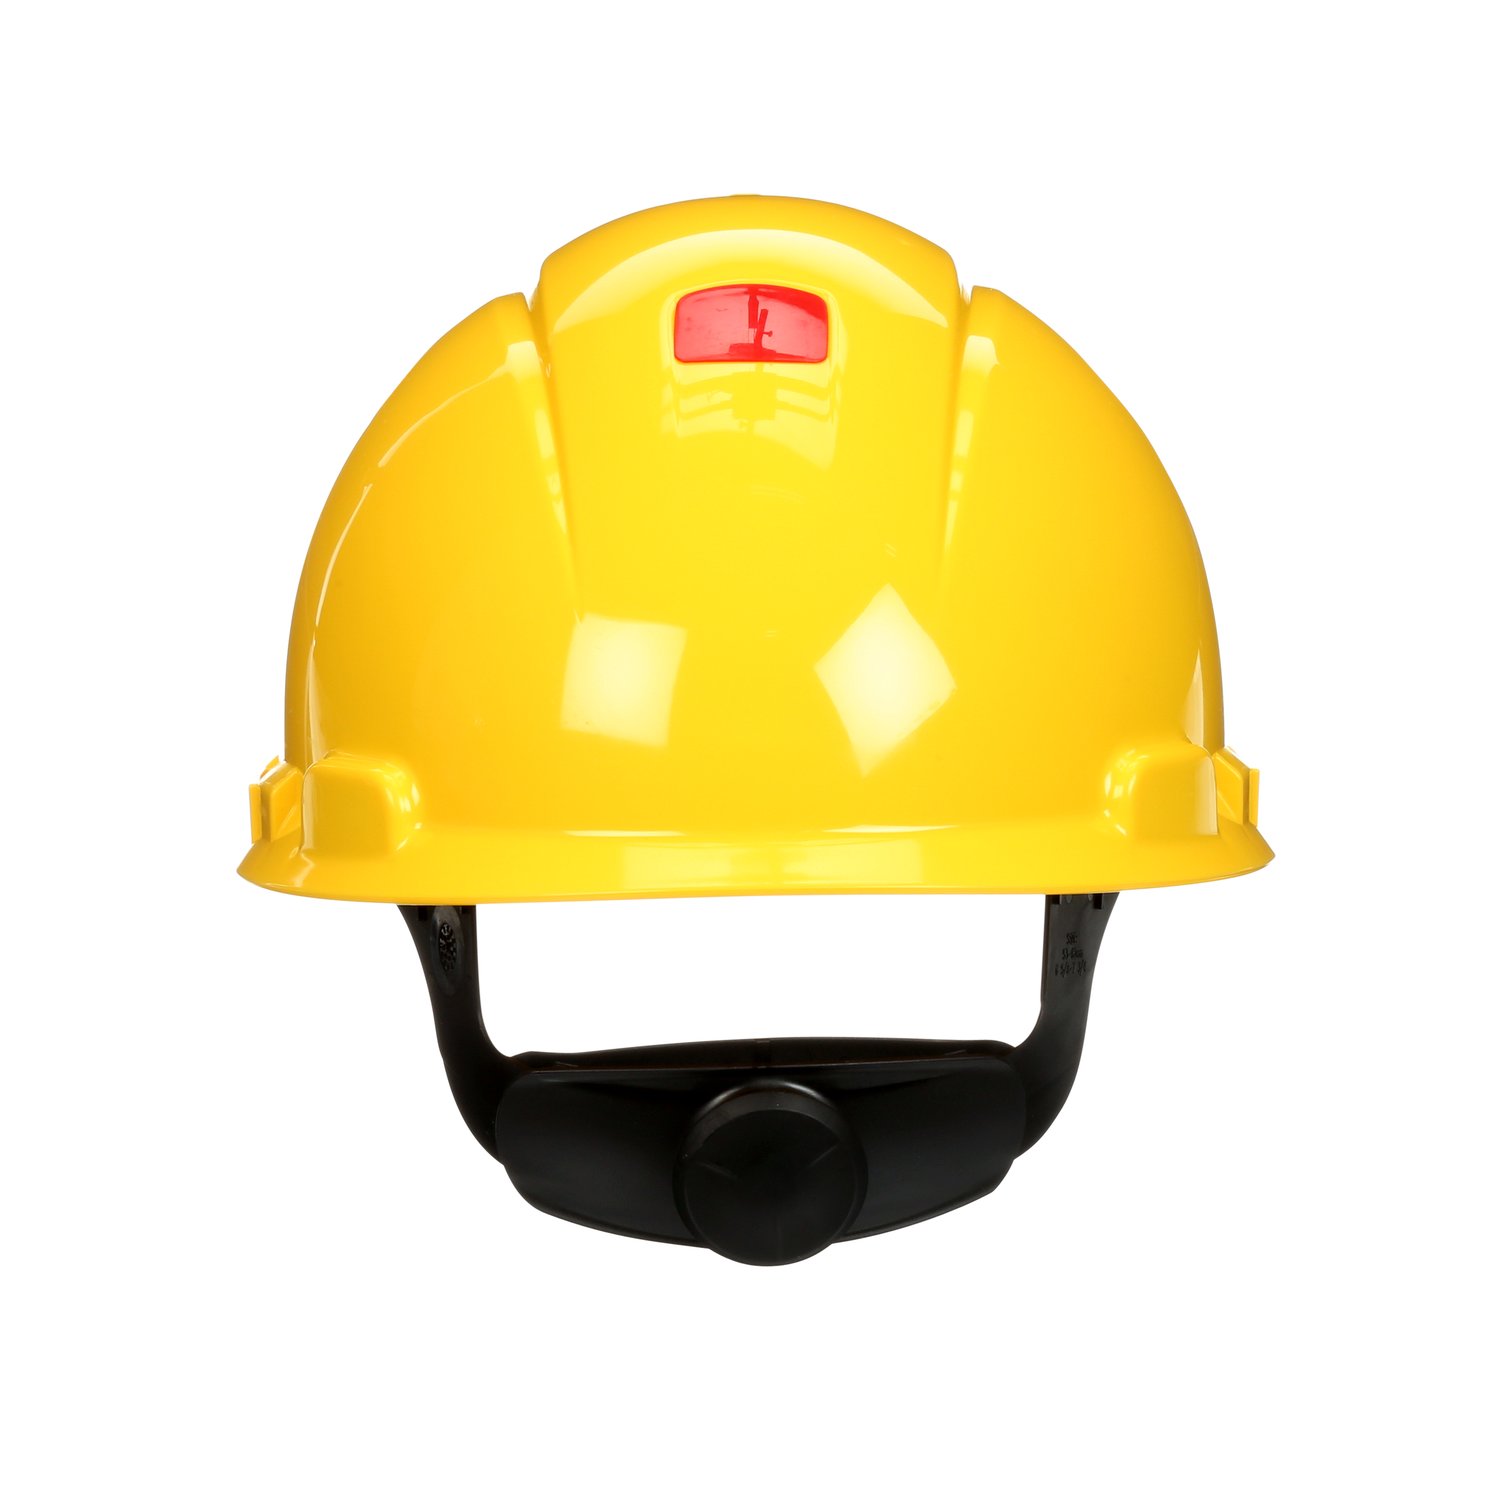 7100239985 - 3M SecureFit Hard Hat H-702SFR-UV, Yellow, 4-Point Pressure Diffusion Ratchet Suspension, with UVicator, 20 ea/Case